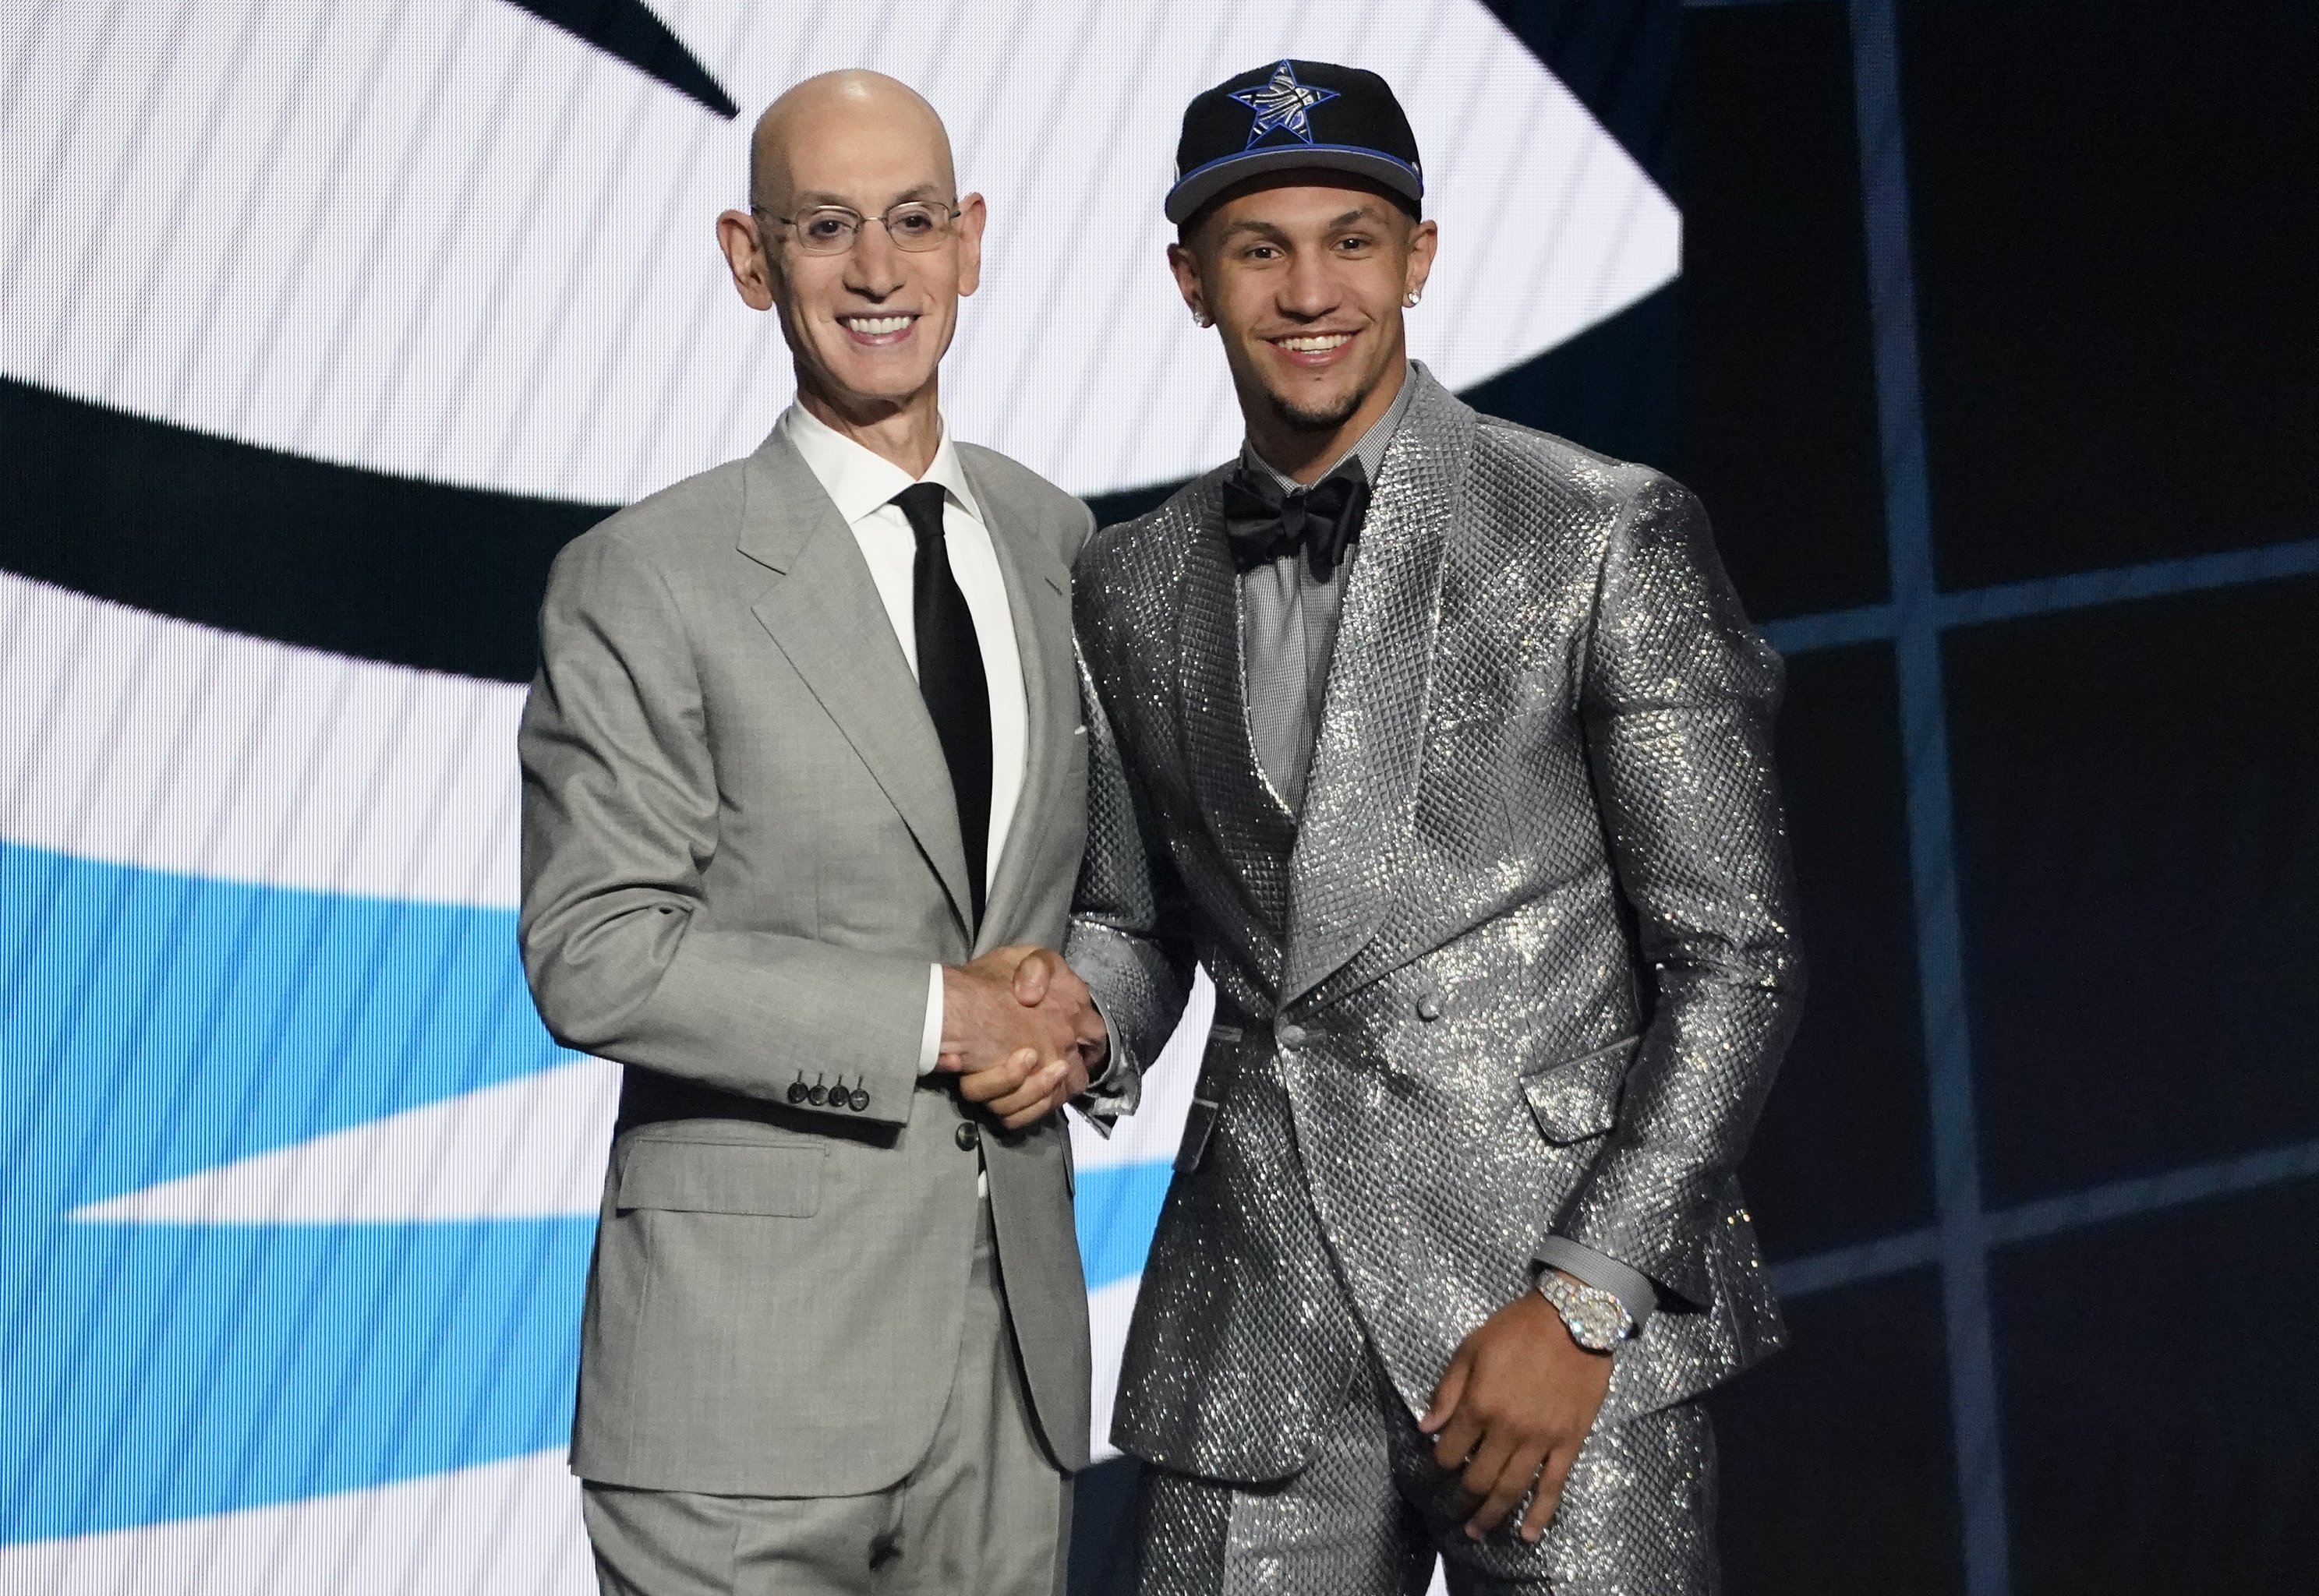 Rate the fits at the NBA Draft 